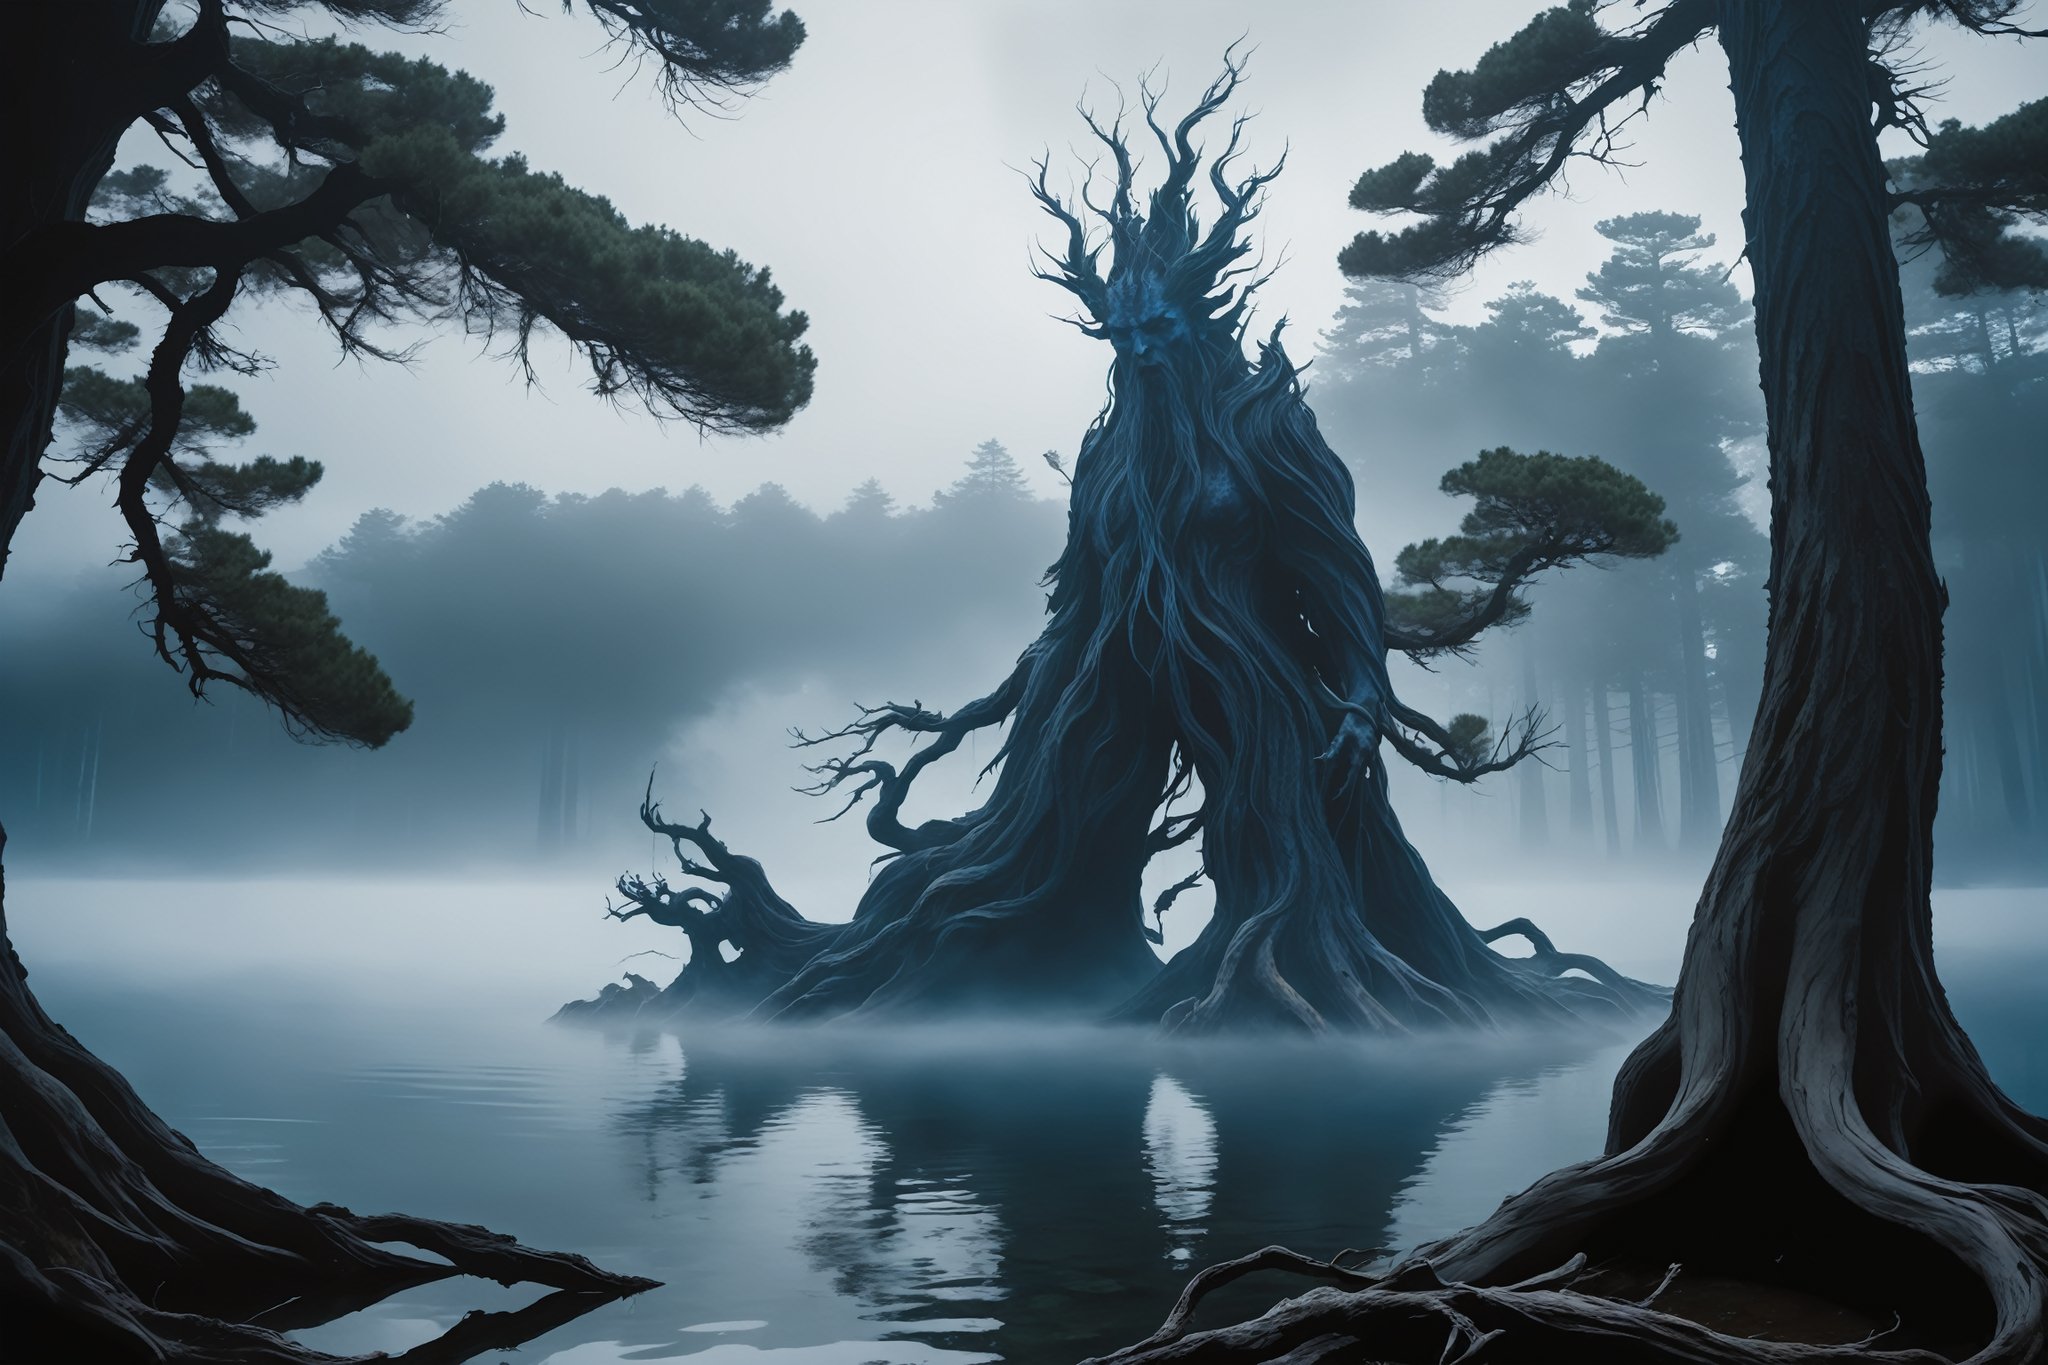 God of the Underworld stands at the edge of a misty lake, surrounded by ancient pines and twisted cypress trees. The air is heavy with the scent of incense and damp earth. With a dramatic flourish, He unsheathes the 'Dark Blue Waves', an evil water magic weapon that crackles with dark energy. The dark blue waves seem to writhe like living serpents, reflecting the God's malevolent intentions. The camera zooms in on the weapon, its surface rippling and distorting as it pulsates with power.